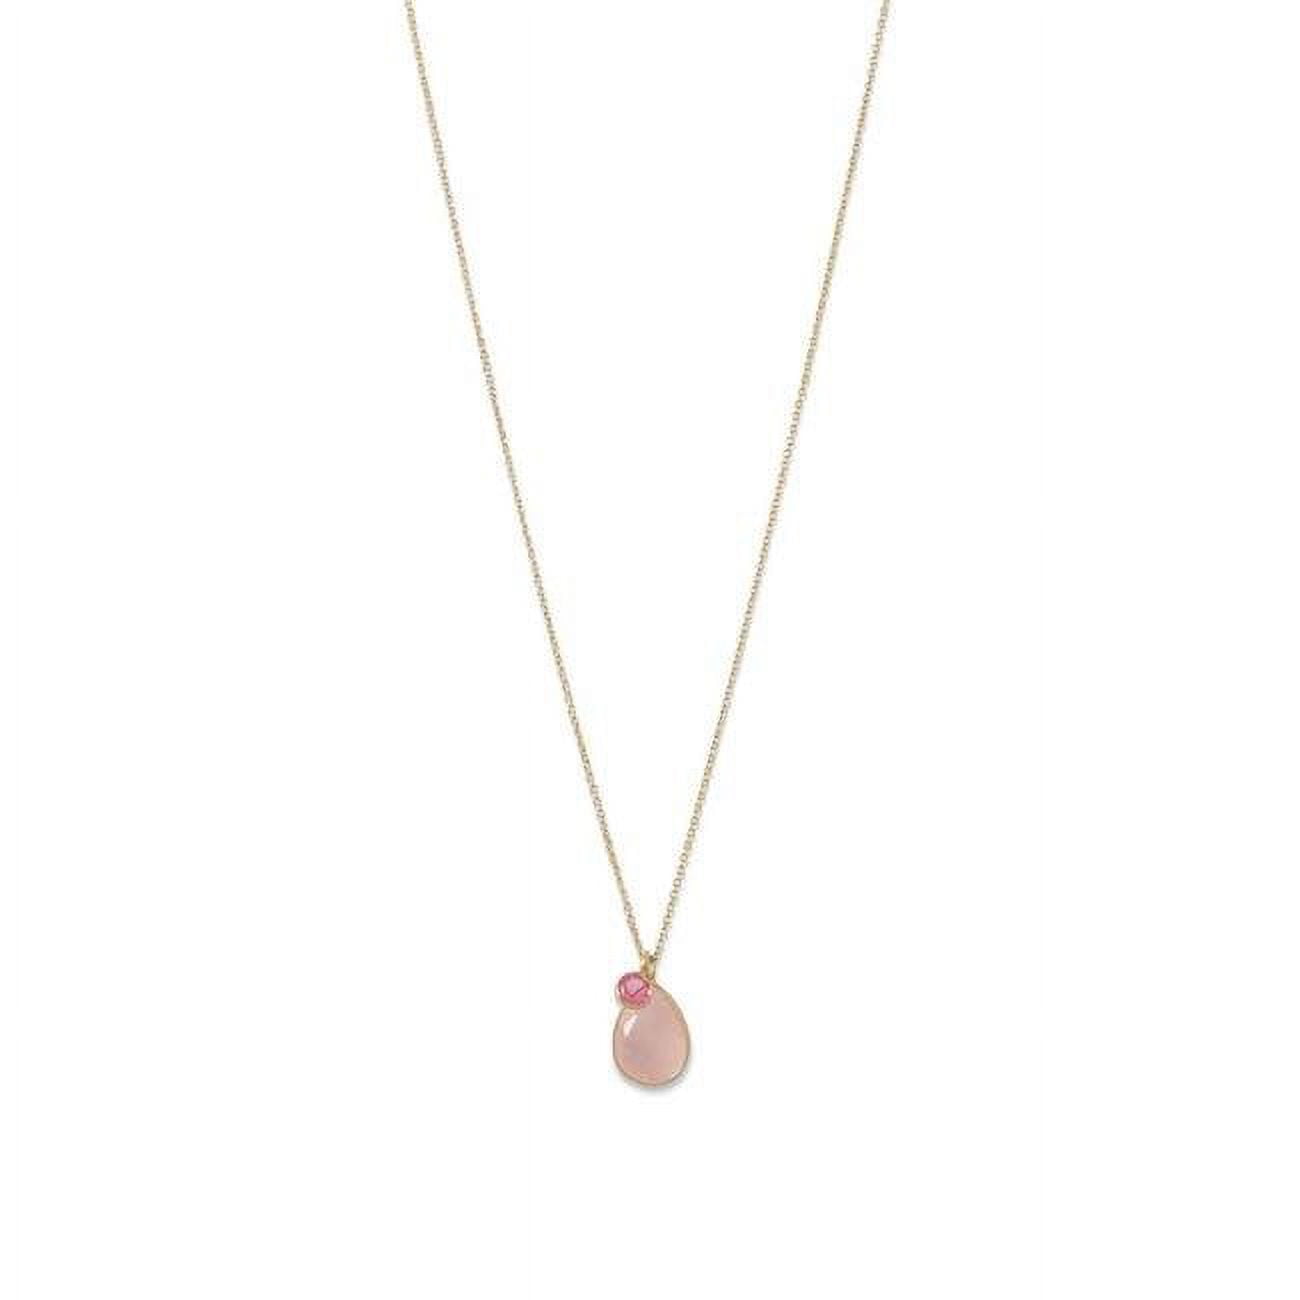 34165x 14k Yellow Gold Plated Sterling Silver Rose Quartz & Pink Hydro Glass Necklace